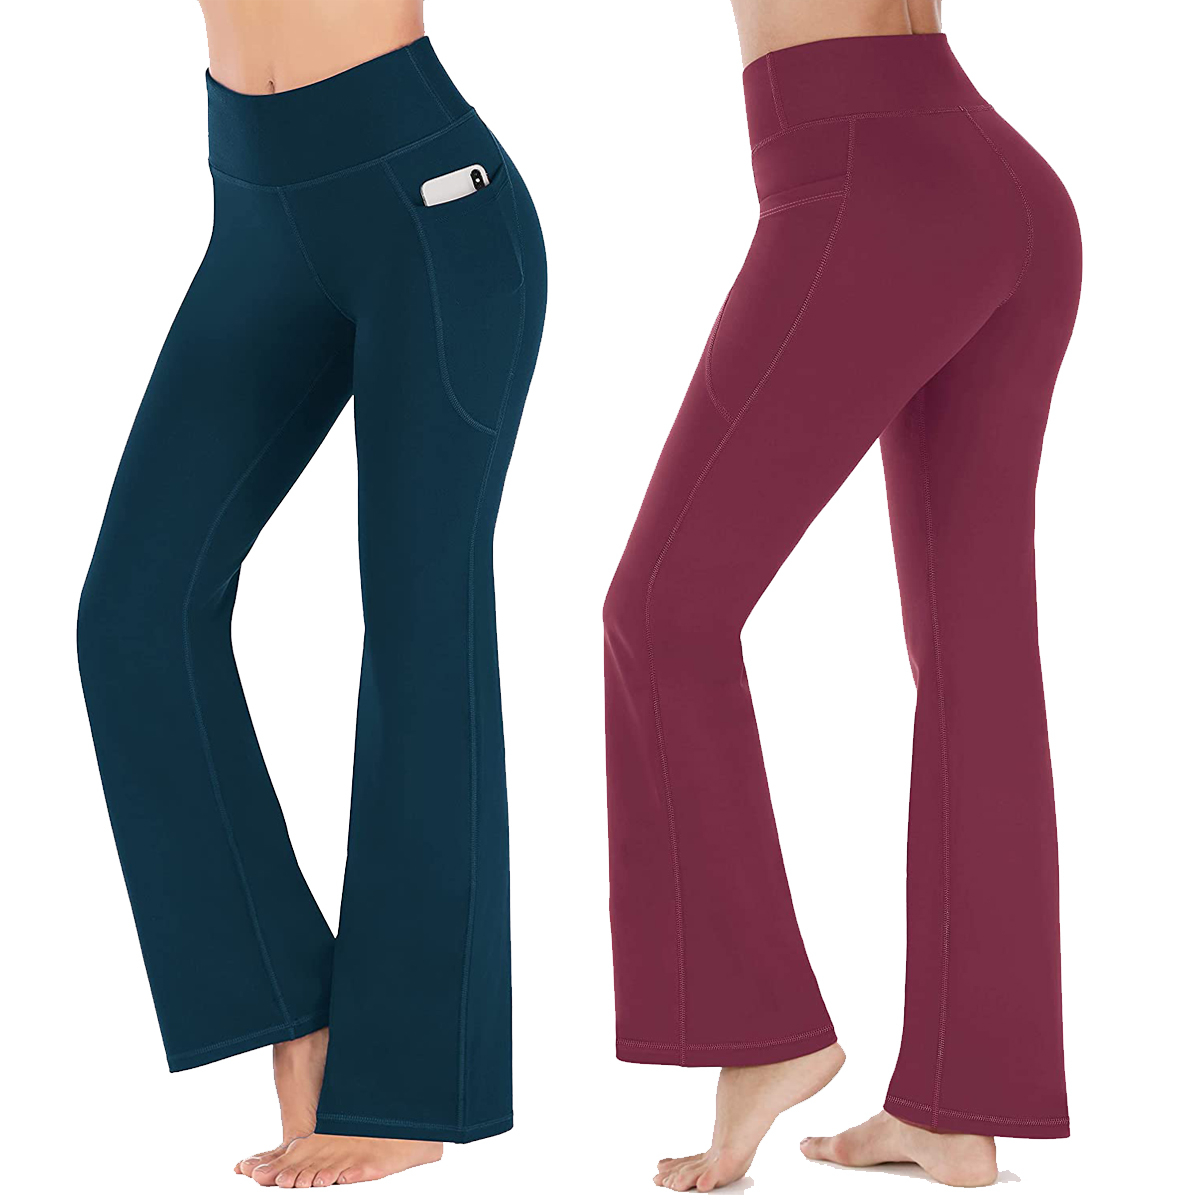 I Can't Stop Wearing These $23 Yoga Pants With Pockets